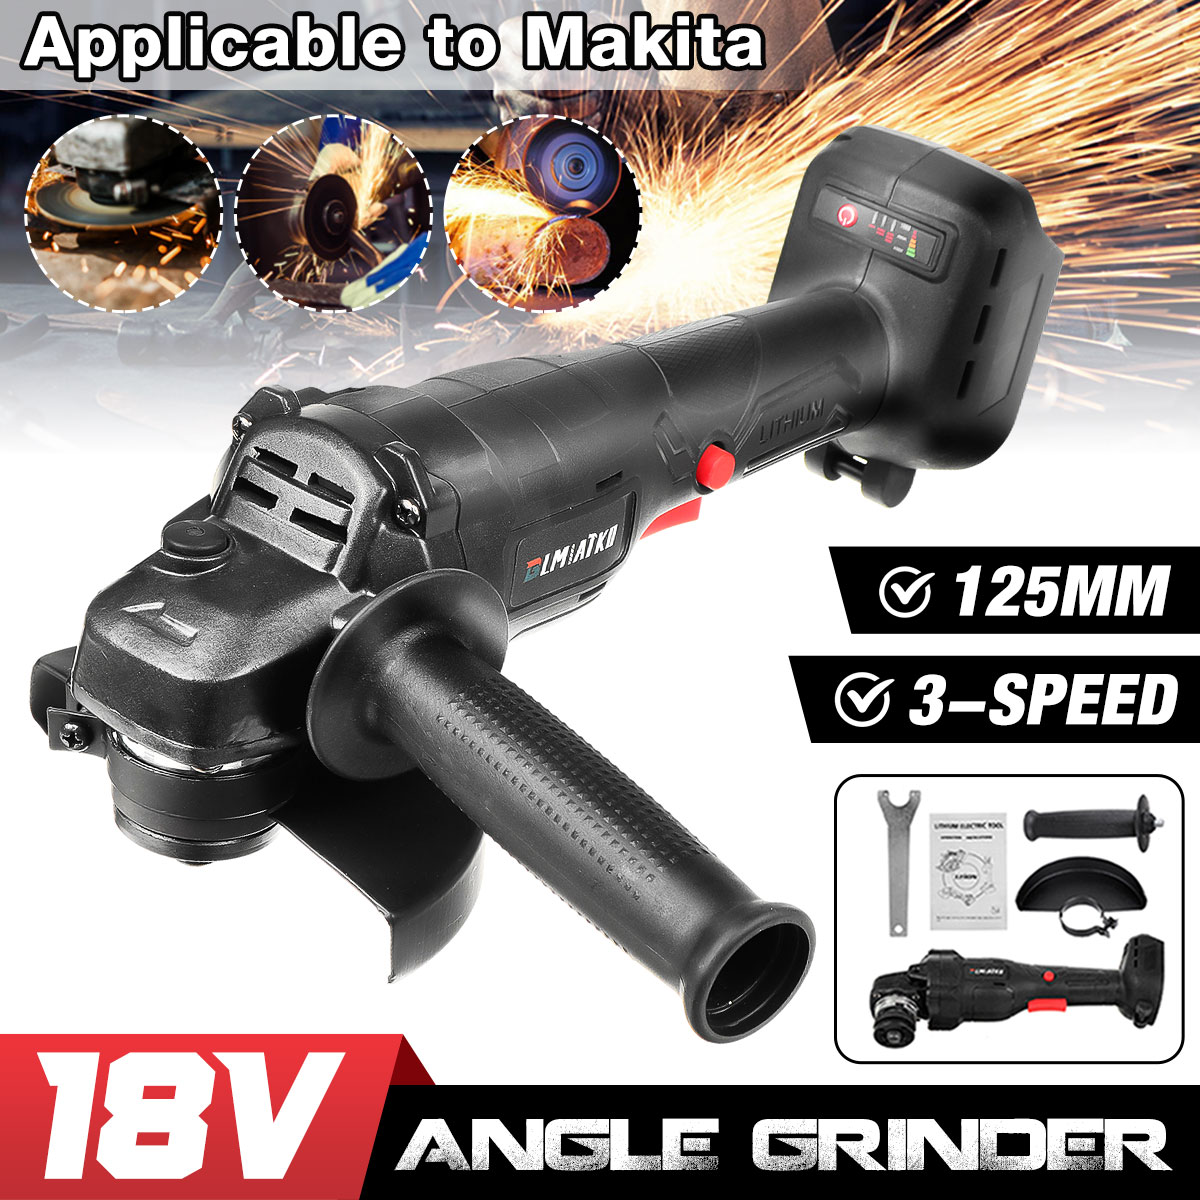 100125MM-Electric-Angle-Grinder-Rechargeable-Multi-function-Grinding-Polishing-Machine-For-Makita-18-1845736-2